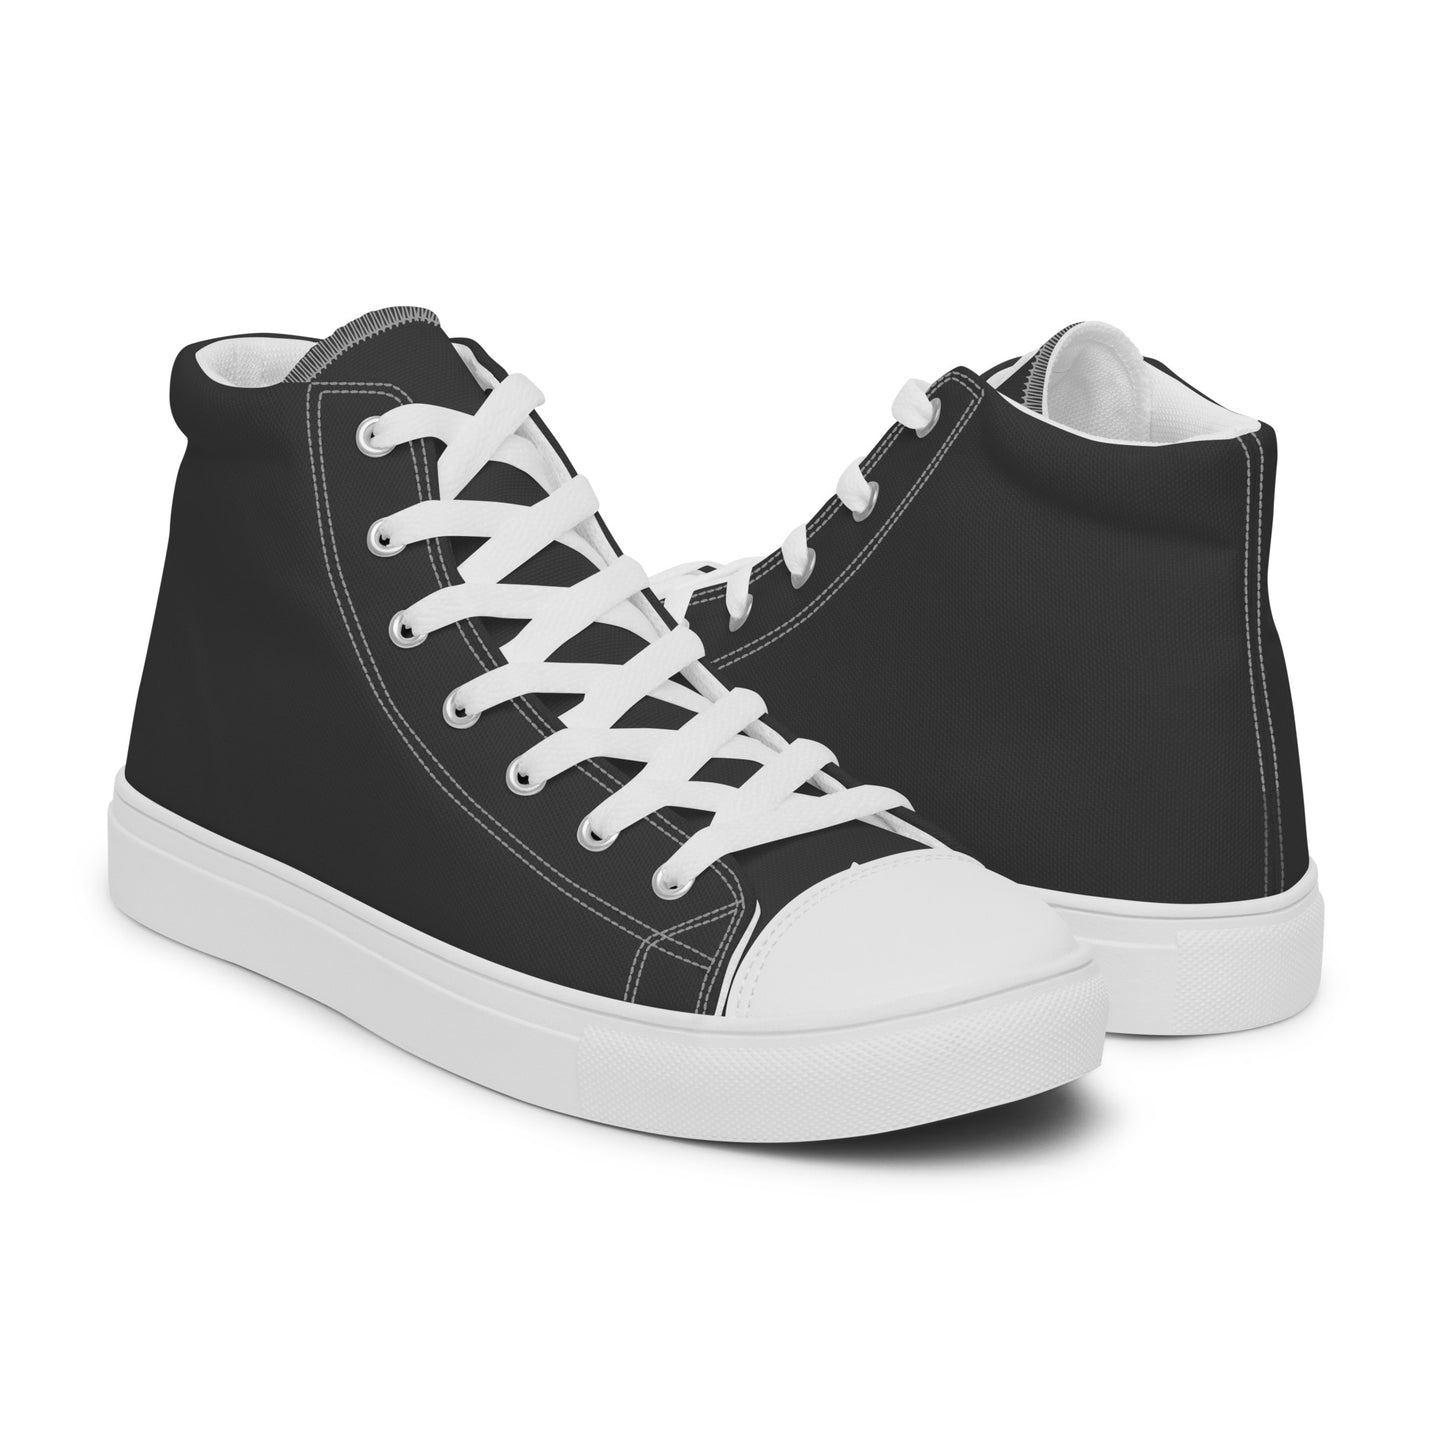 Charcoal - Sustainably Made Men's High Top Canvas Shoes